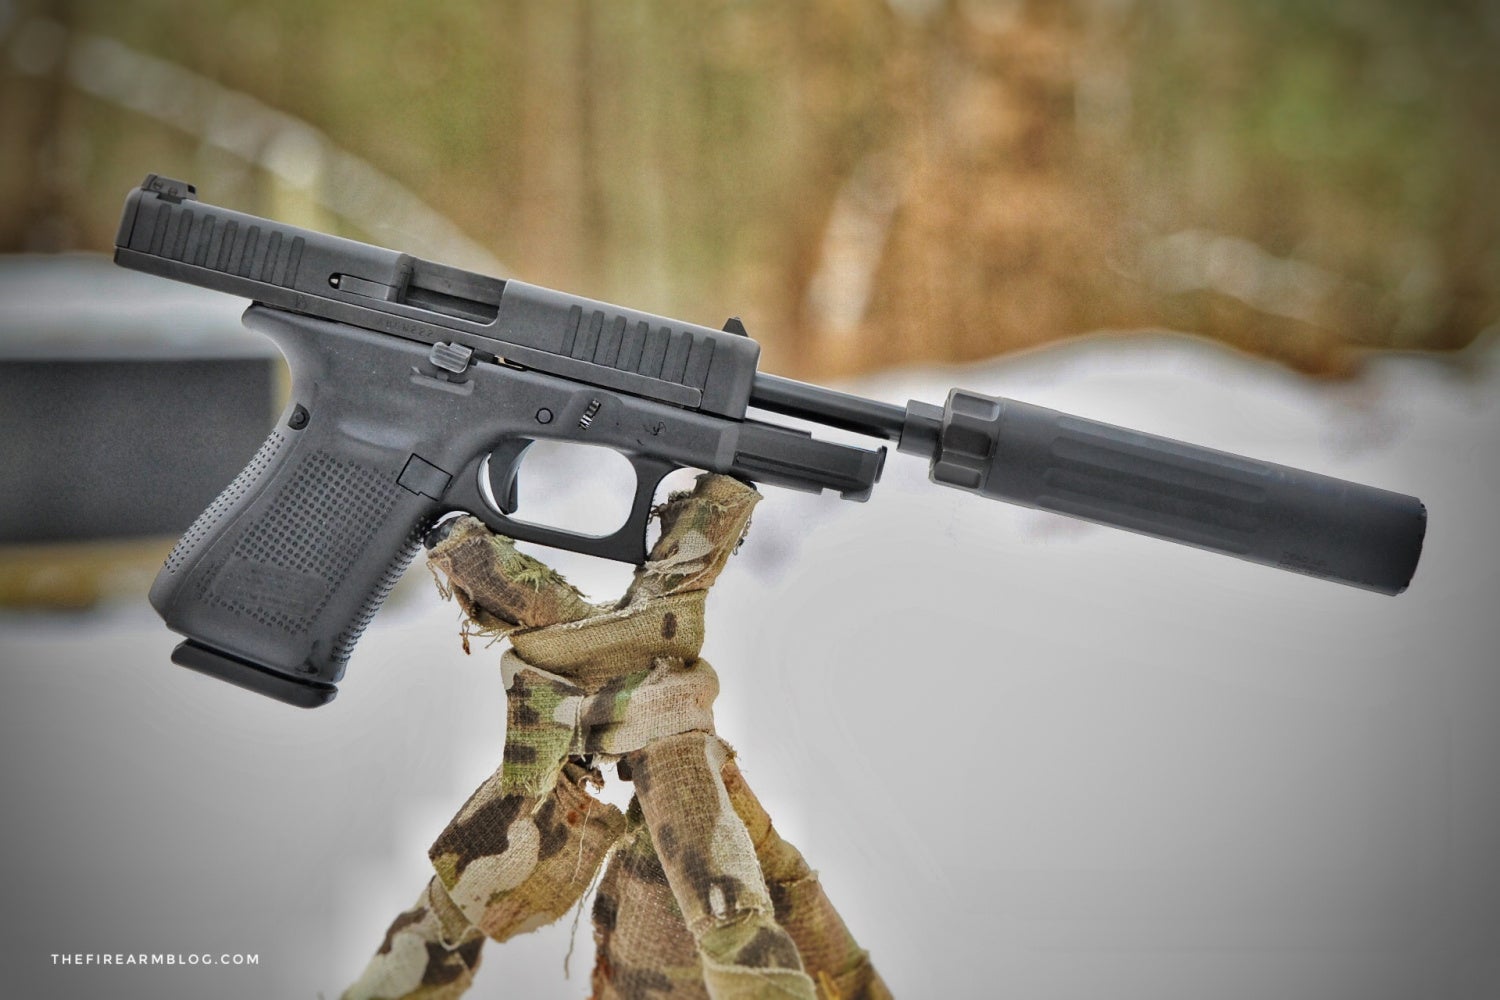 SILENCER SATURDAY #104: The GLOCK 44 Suppressed